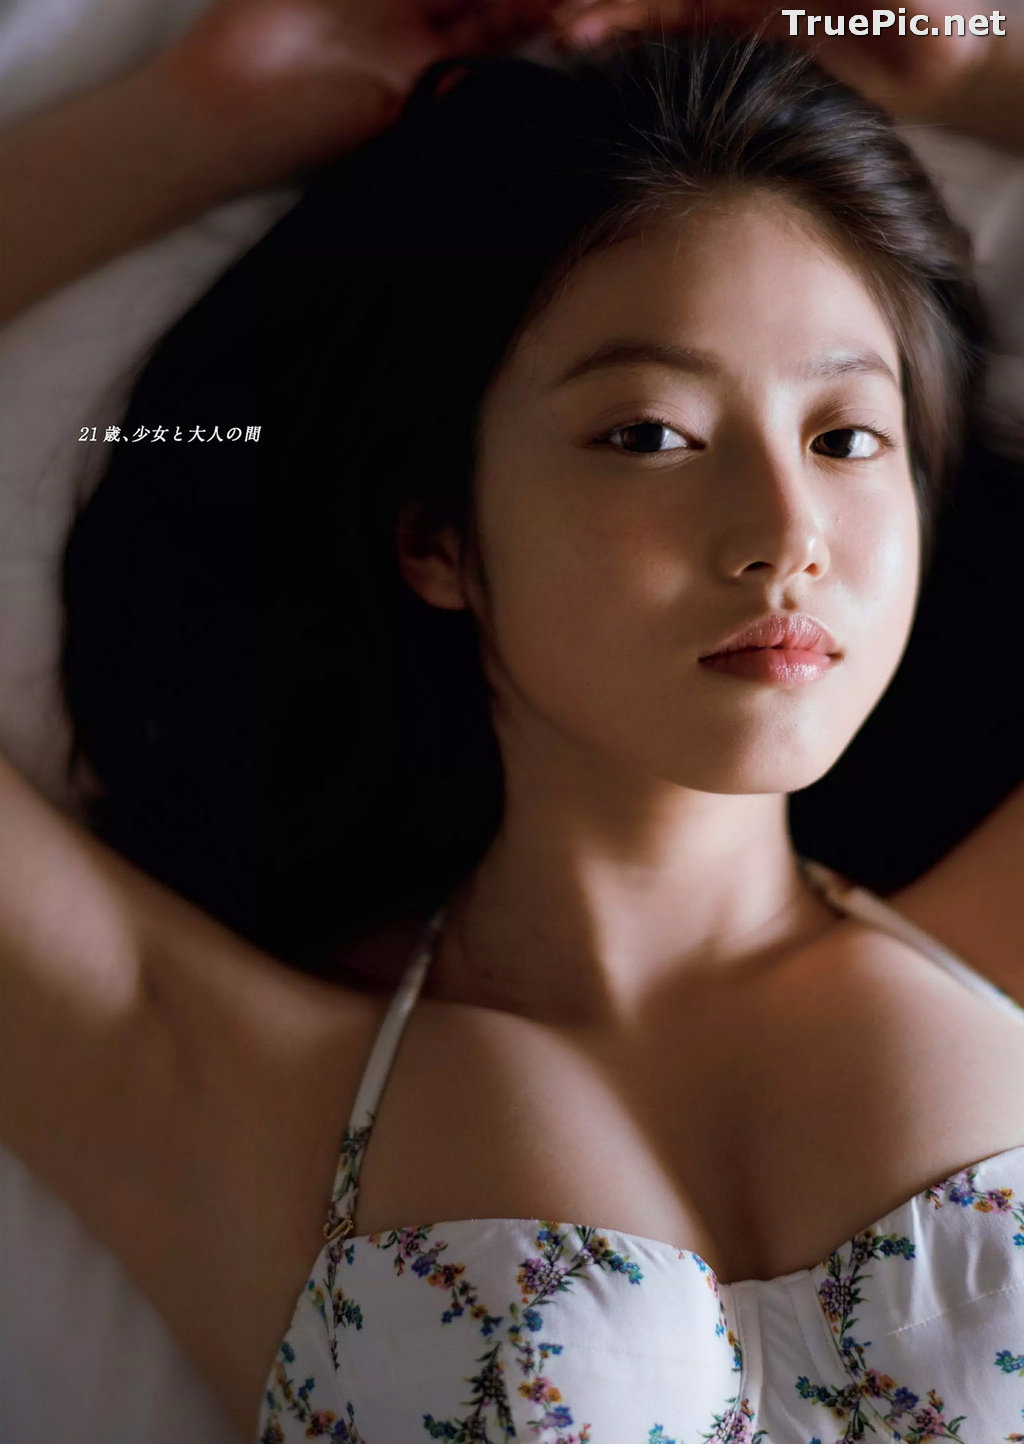 Image Japanese Actress and Model - Mio Imada (今田美櫻) - Sexy Picture Collection 2020 - TruePic.net - Picture-174